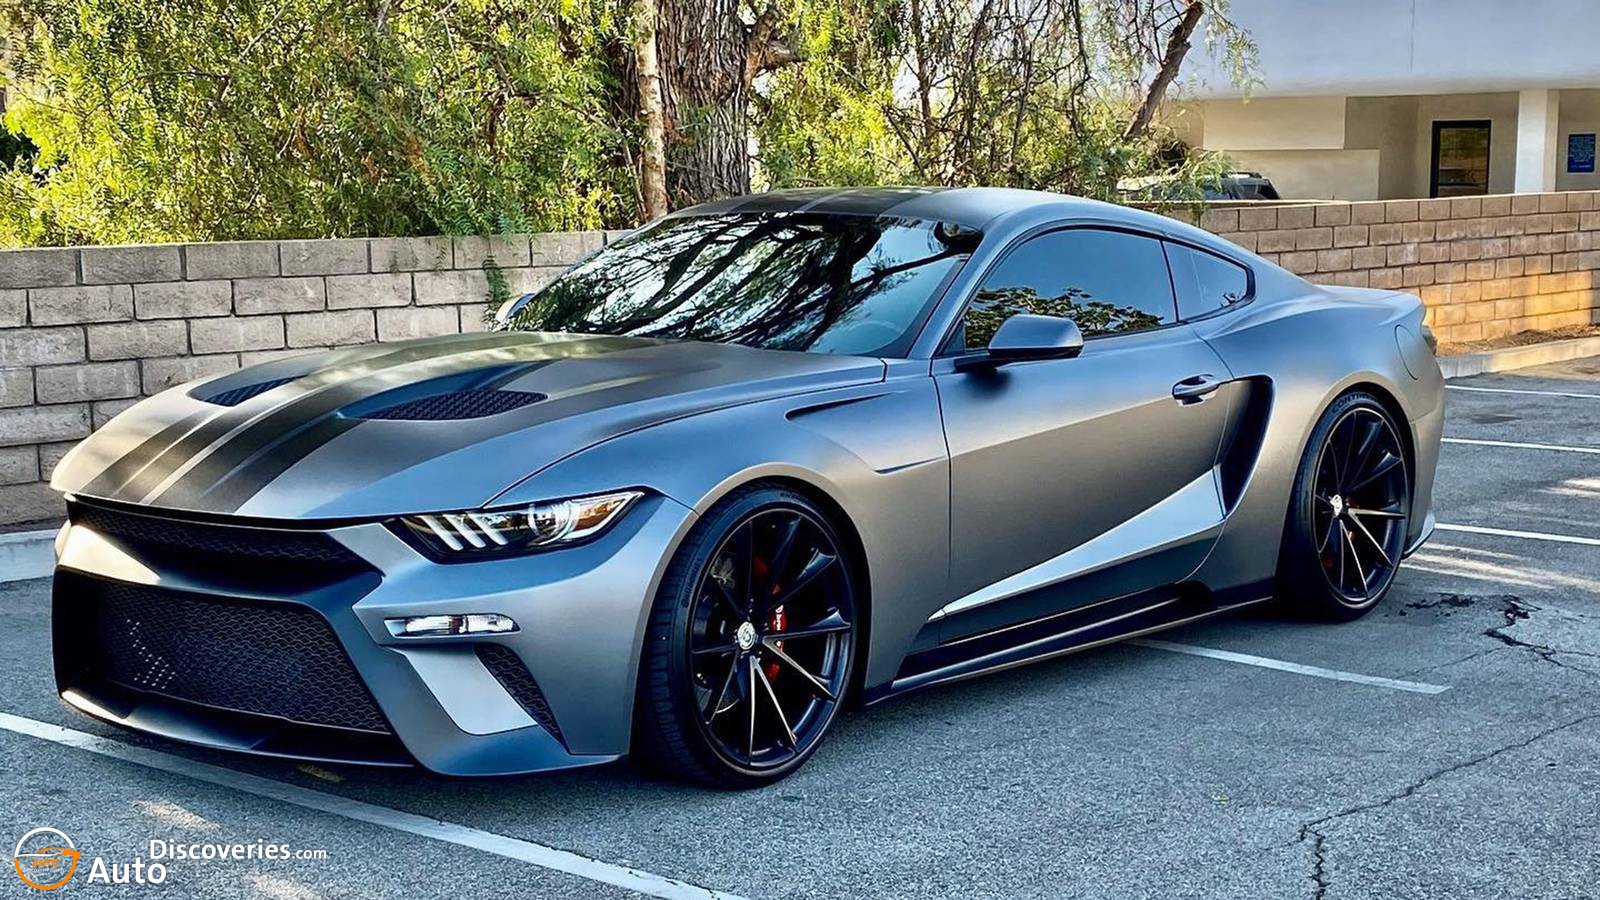 Meet The New Ford Mustang 2023!